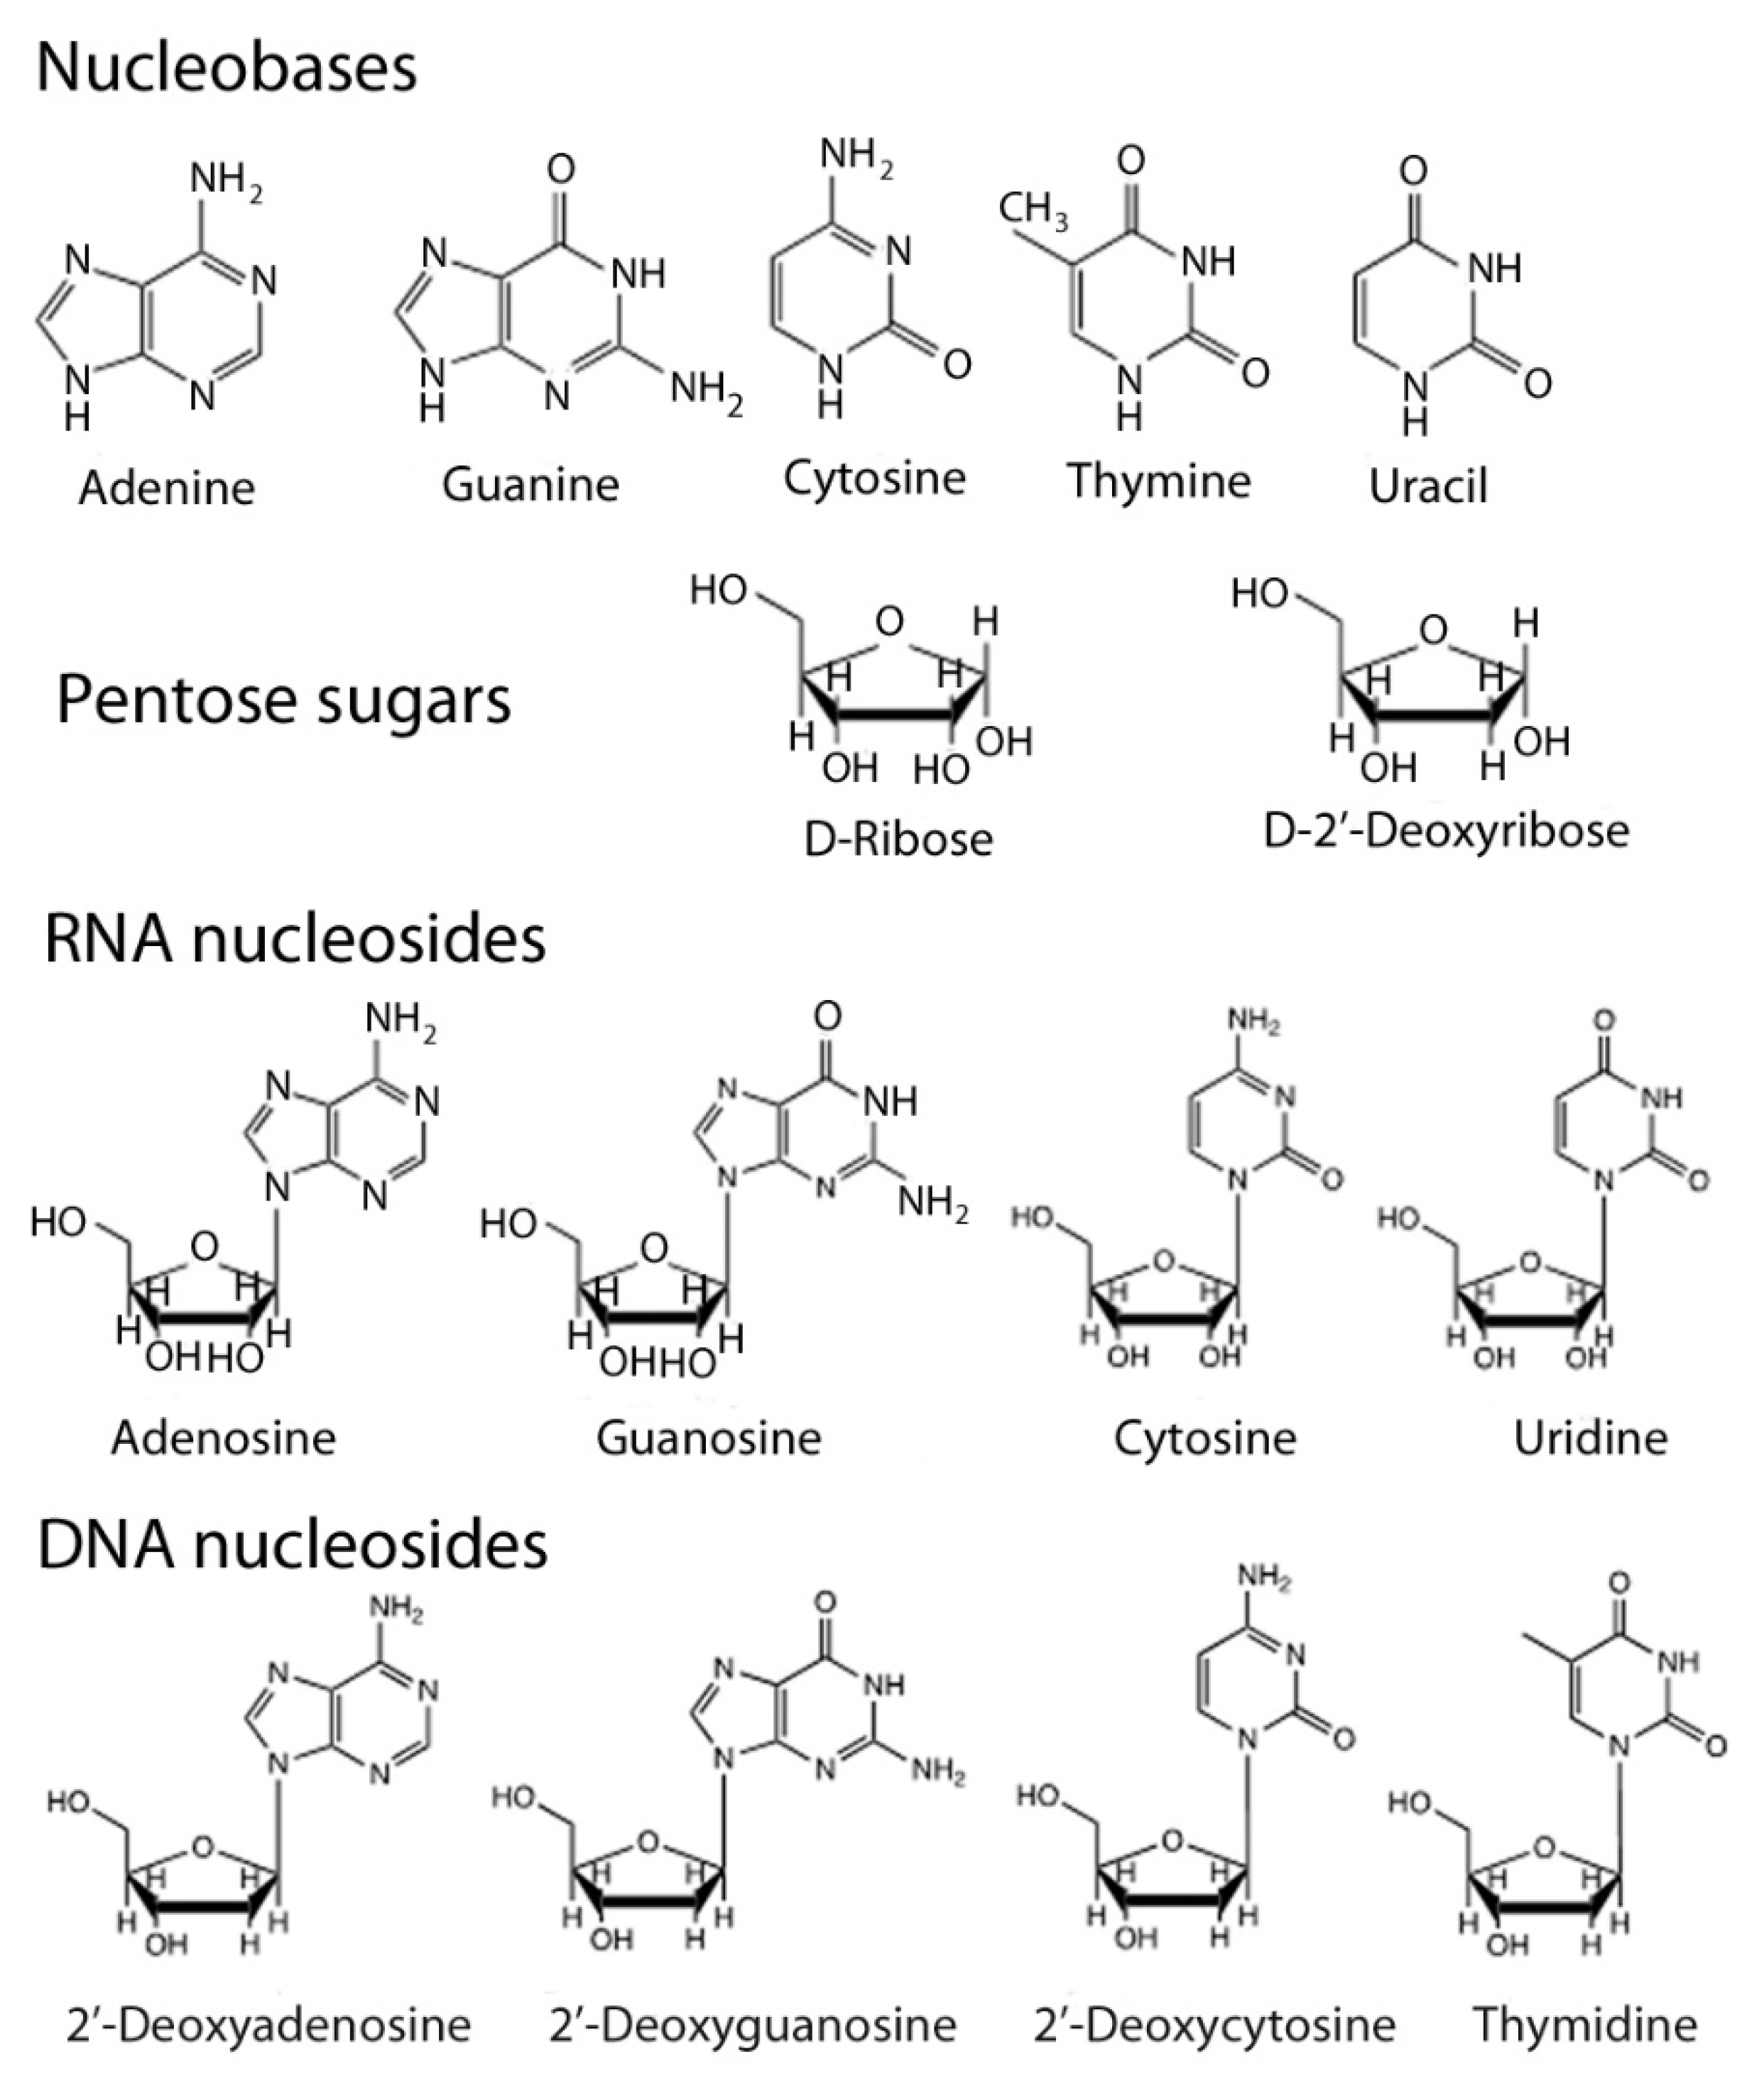 Life | Free Full-Text | De Novo Nucleic Acids: A Review of Synthetic  Alternatives to DNA and RNA That Could Act as Bio-Information Storage  Molecules